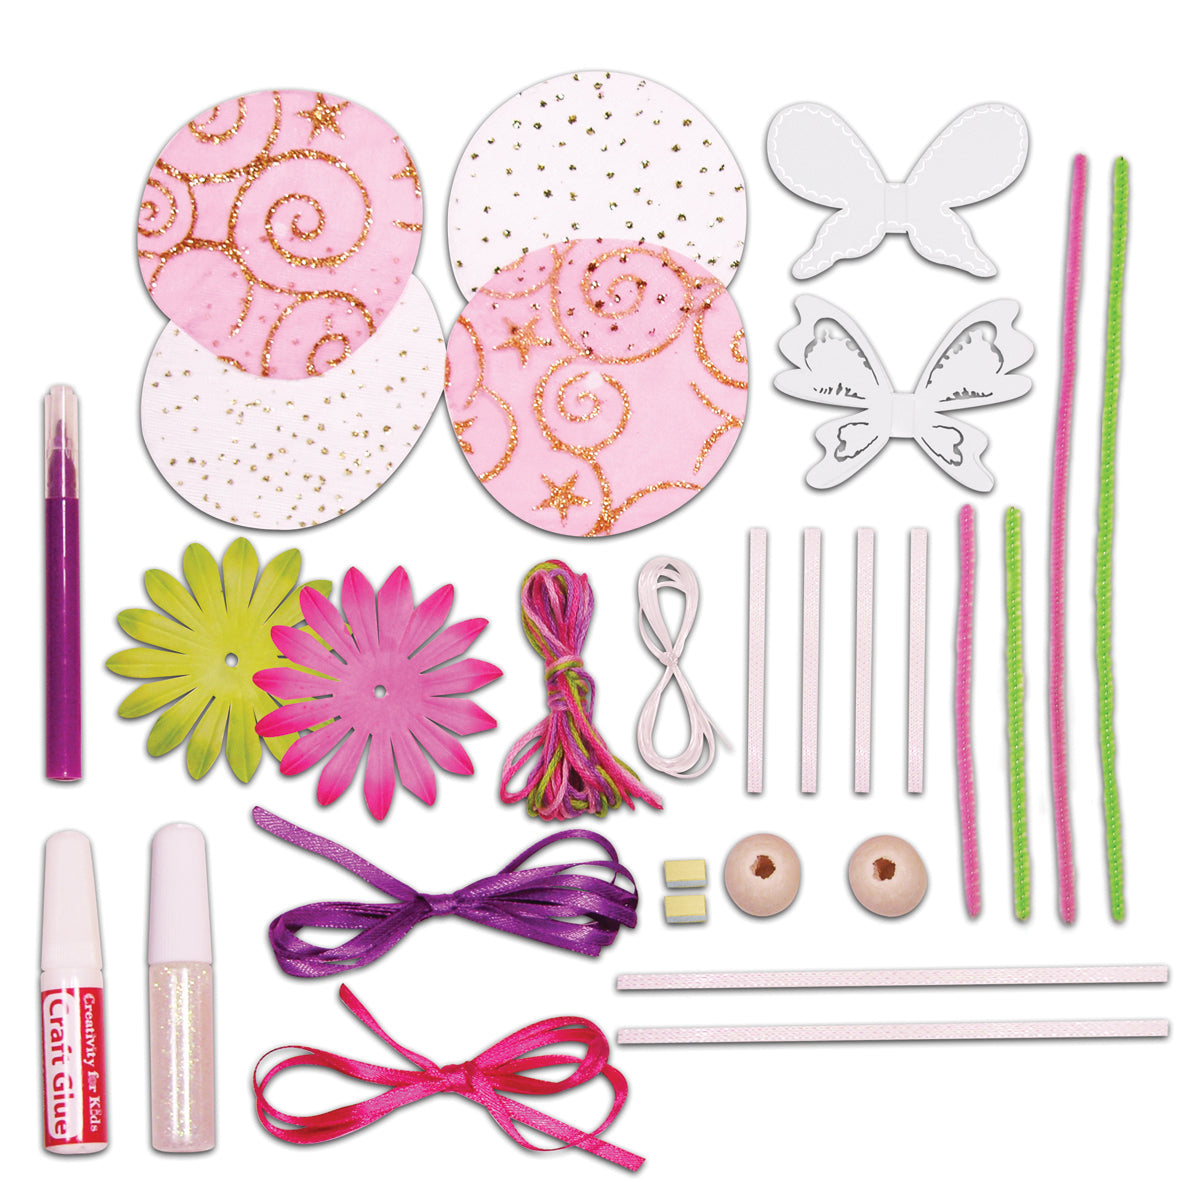 Components in the make your own fairy kit- comprising marker, glitter,  strings,, paper wing cut outs etc.